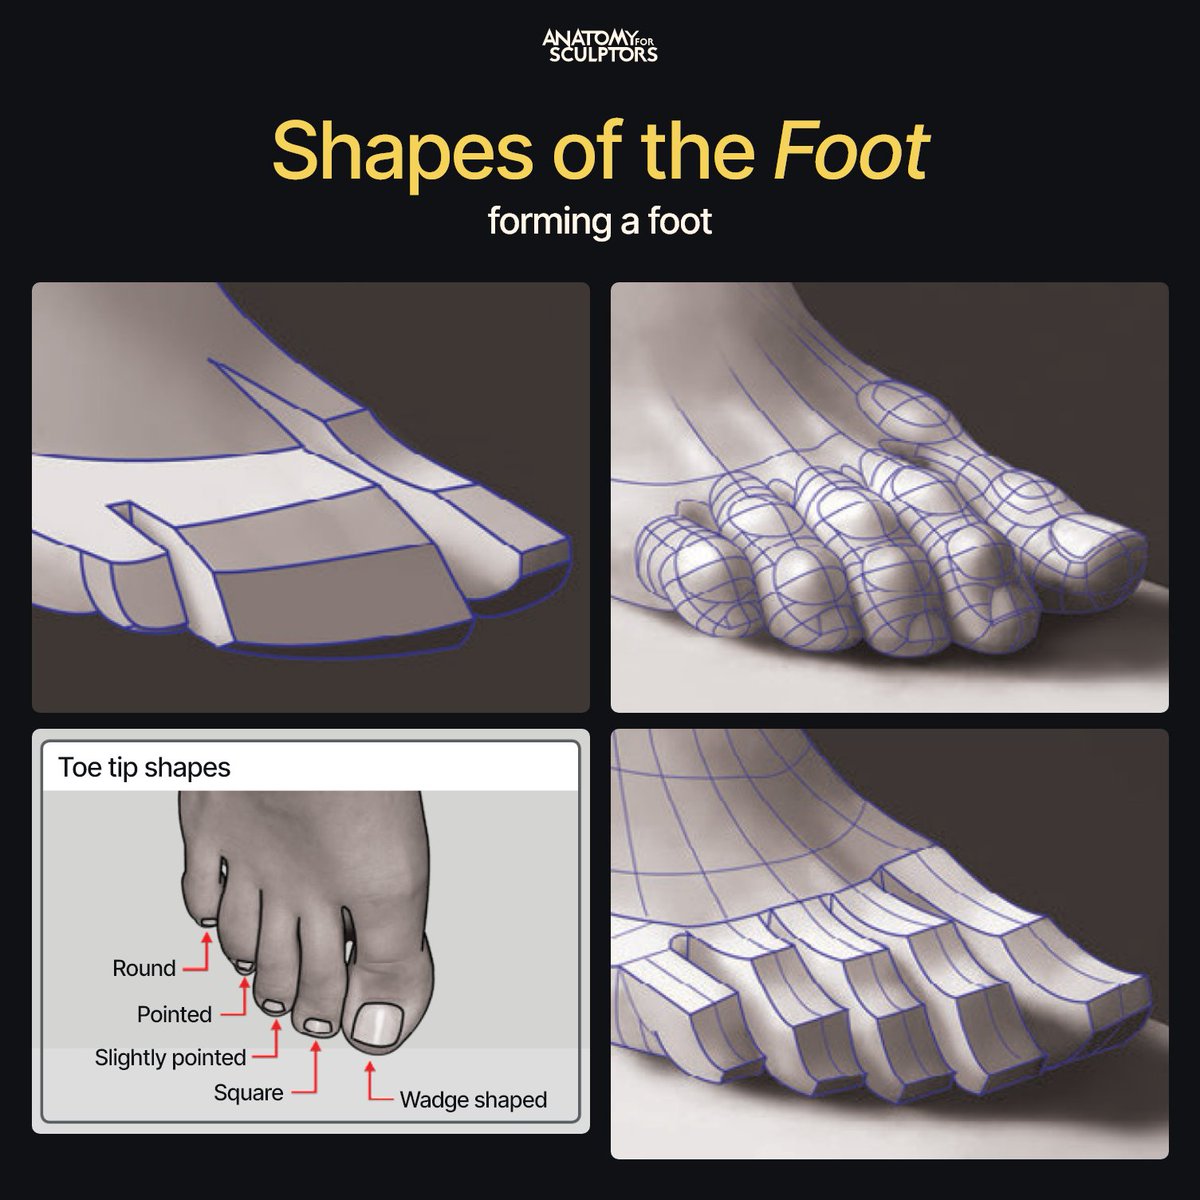 Each toe tip has a different shape. When you begin forming the foot, keep the three middle toes together and only separate the big toe and the pinky toe. #anatomy #characterdesign #3dmodeling